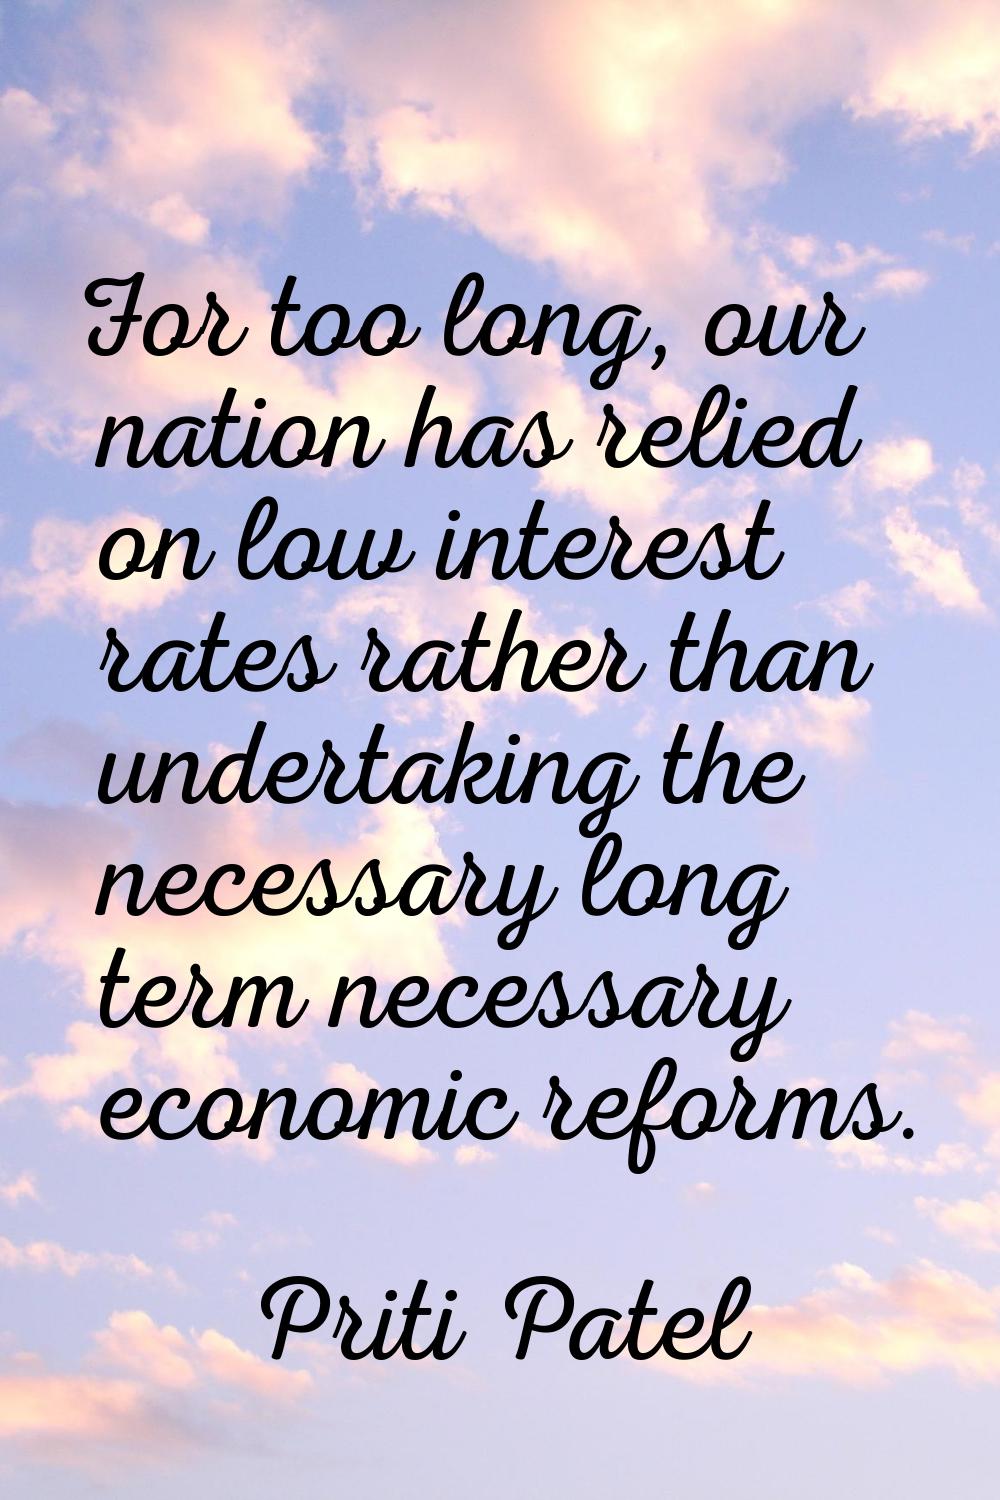 For too long, our nation has relied on low interest rates rather than undertaking the necessary lon